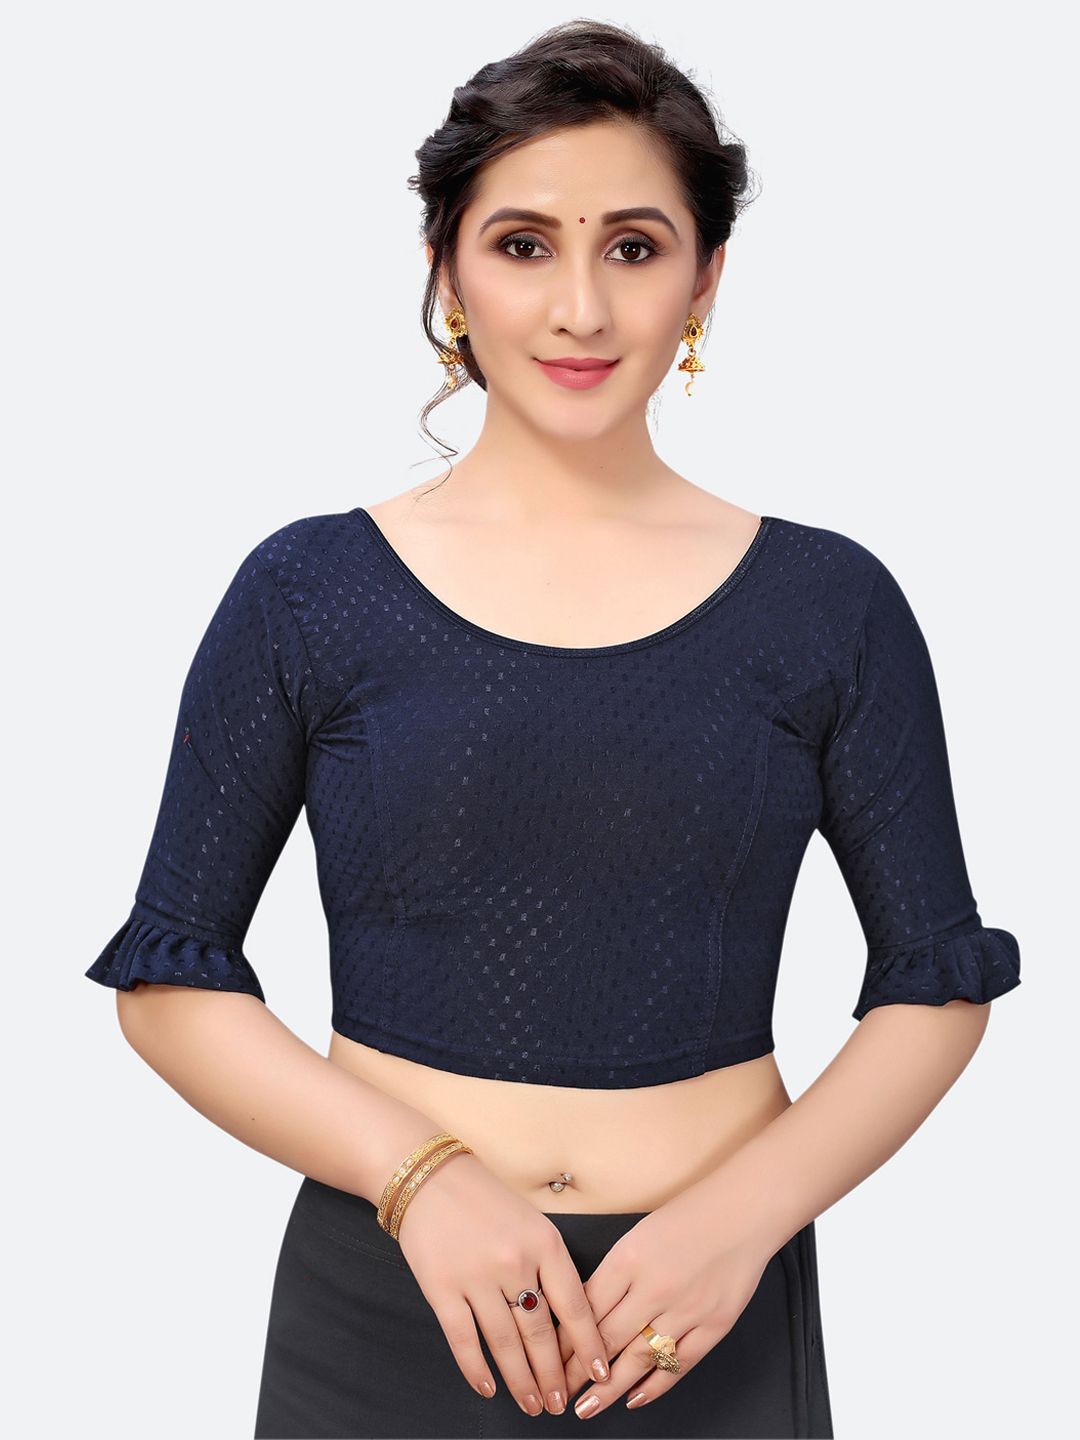 SIRIL Women Navy Blue Woven Design Saree Blouse Price in India